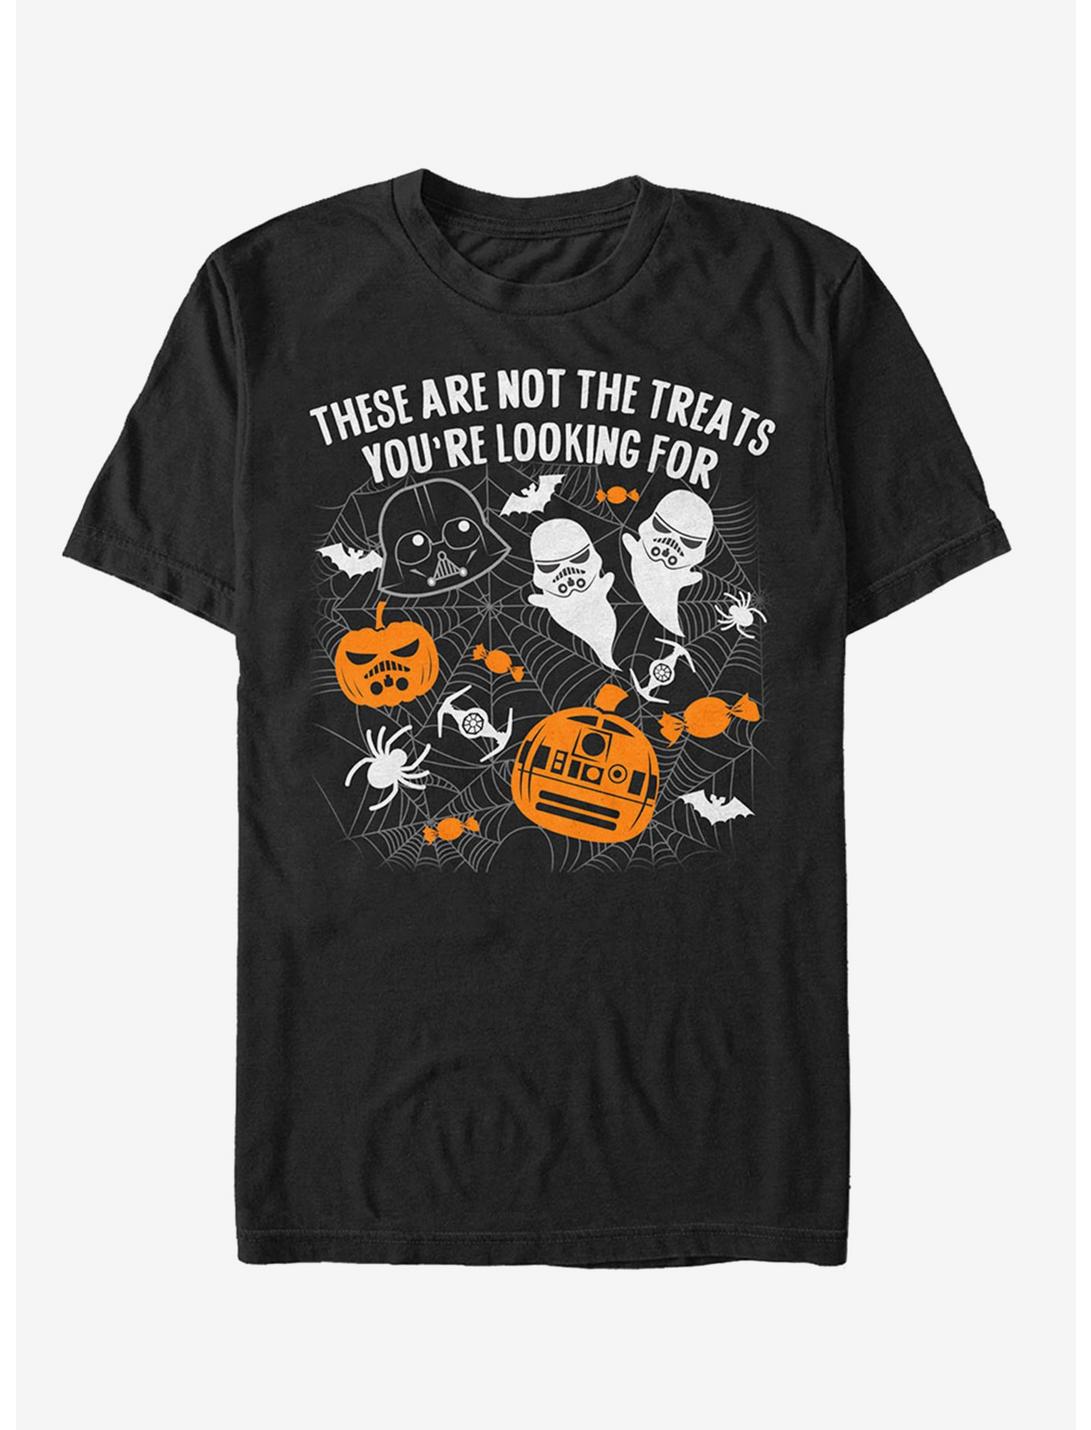 Star Wars Not The Treats You're Looking For T-Shirt, BLACK, hi-res